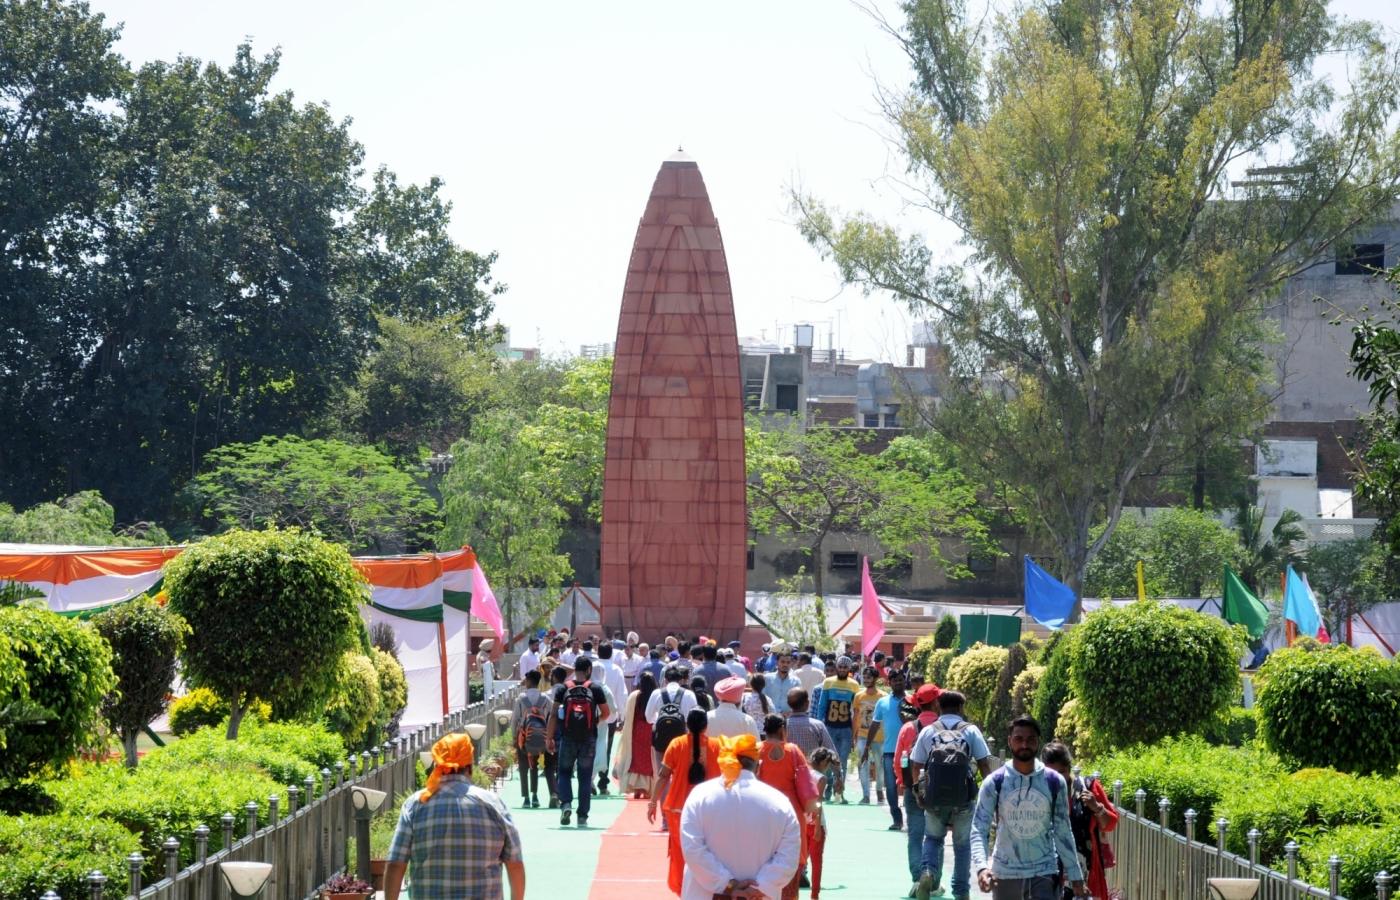 Amritsar: Visitors visit the Jaillanawala Bagh on the 99th anniversary of the Jallianwala Bagh massacre, in Amritsar on April 13, 2018. (Photo: IANS) by .